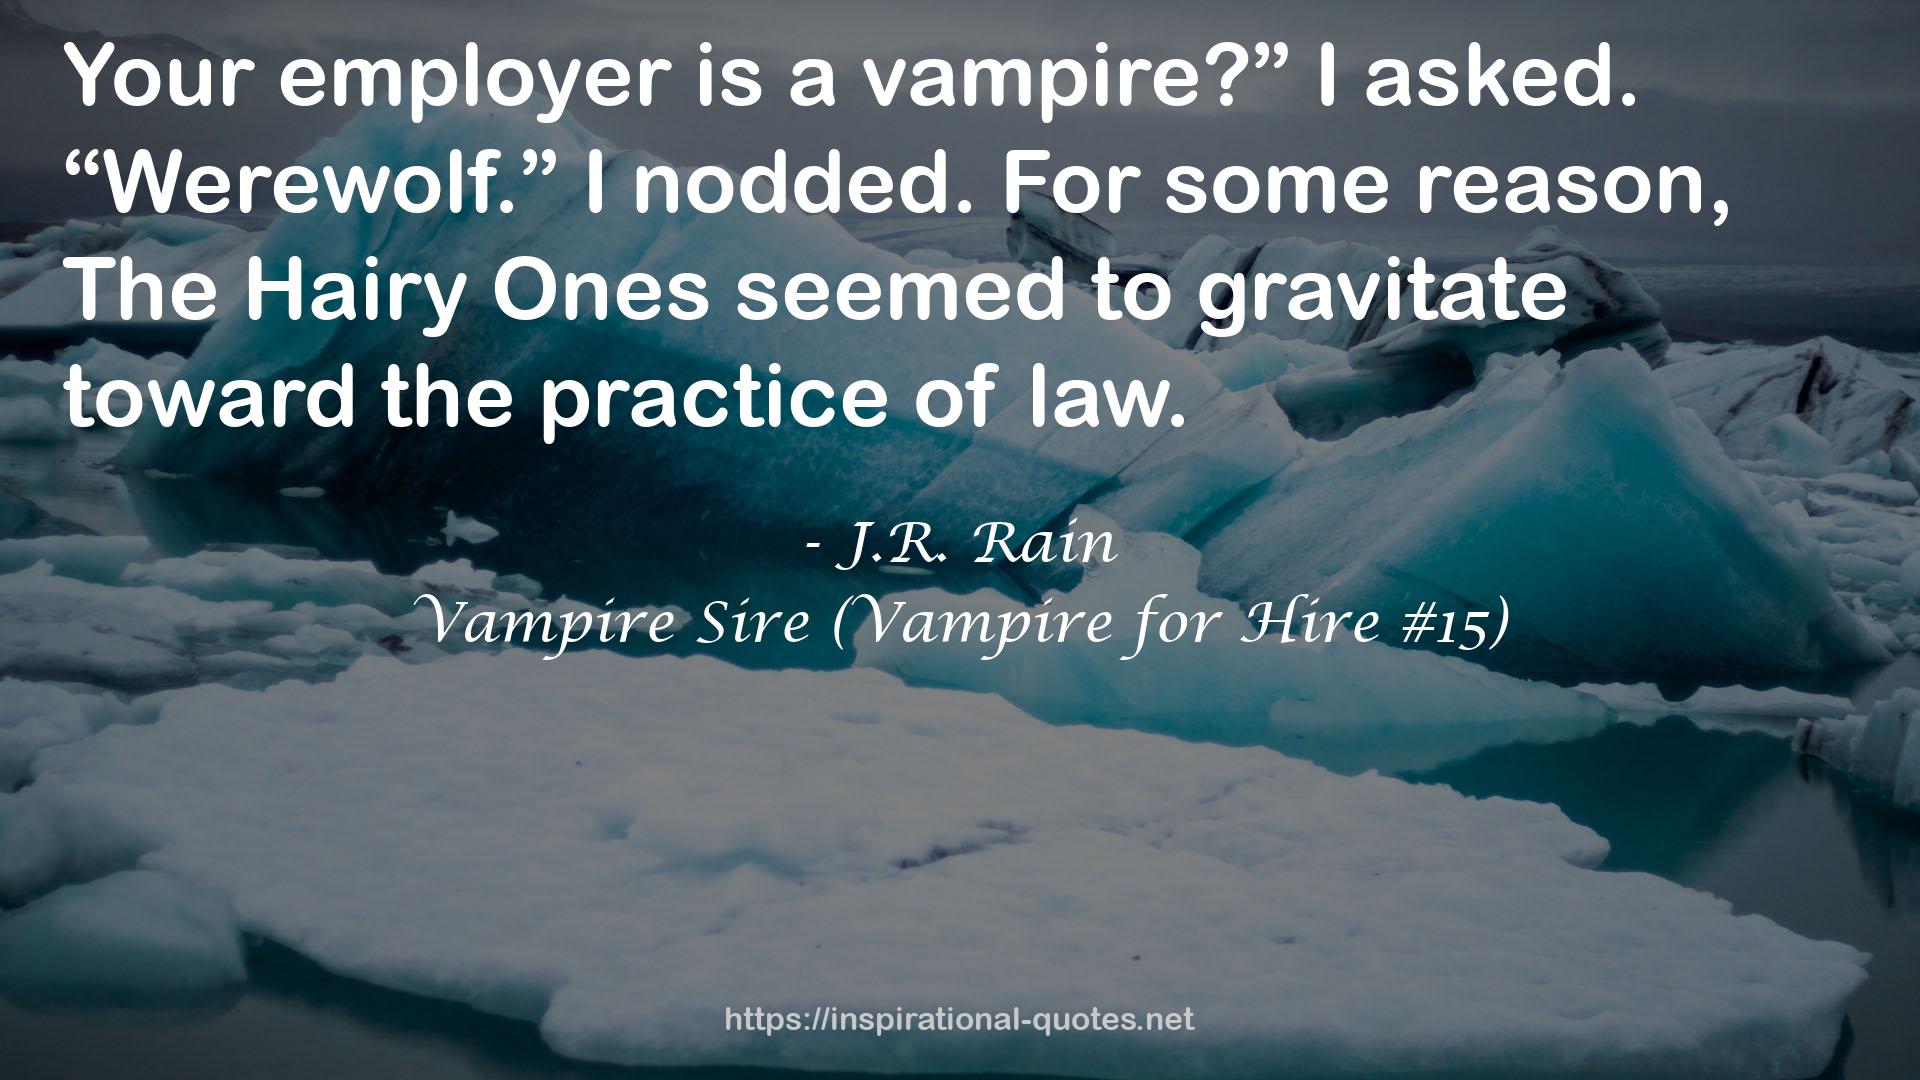 Vampire Sire (Vampire for Hire #15) QUOTES